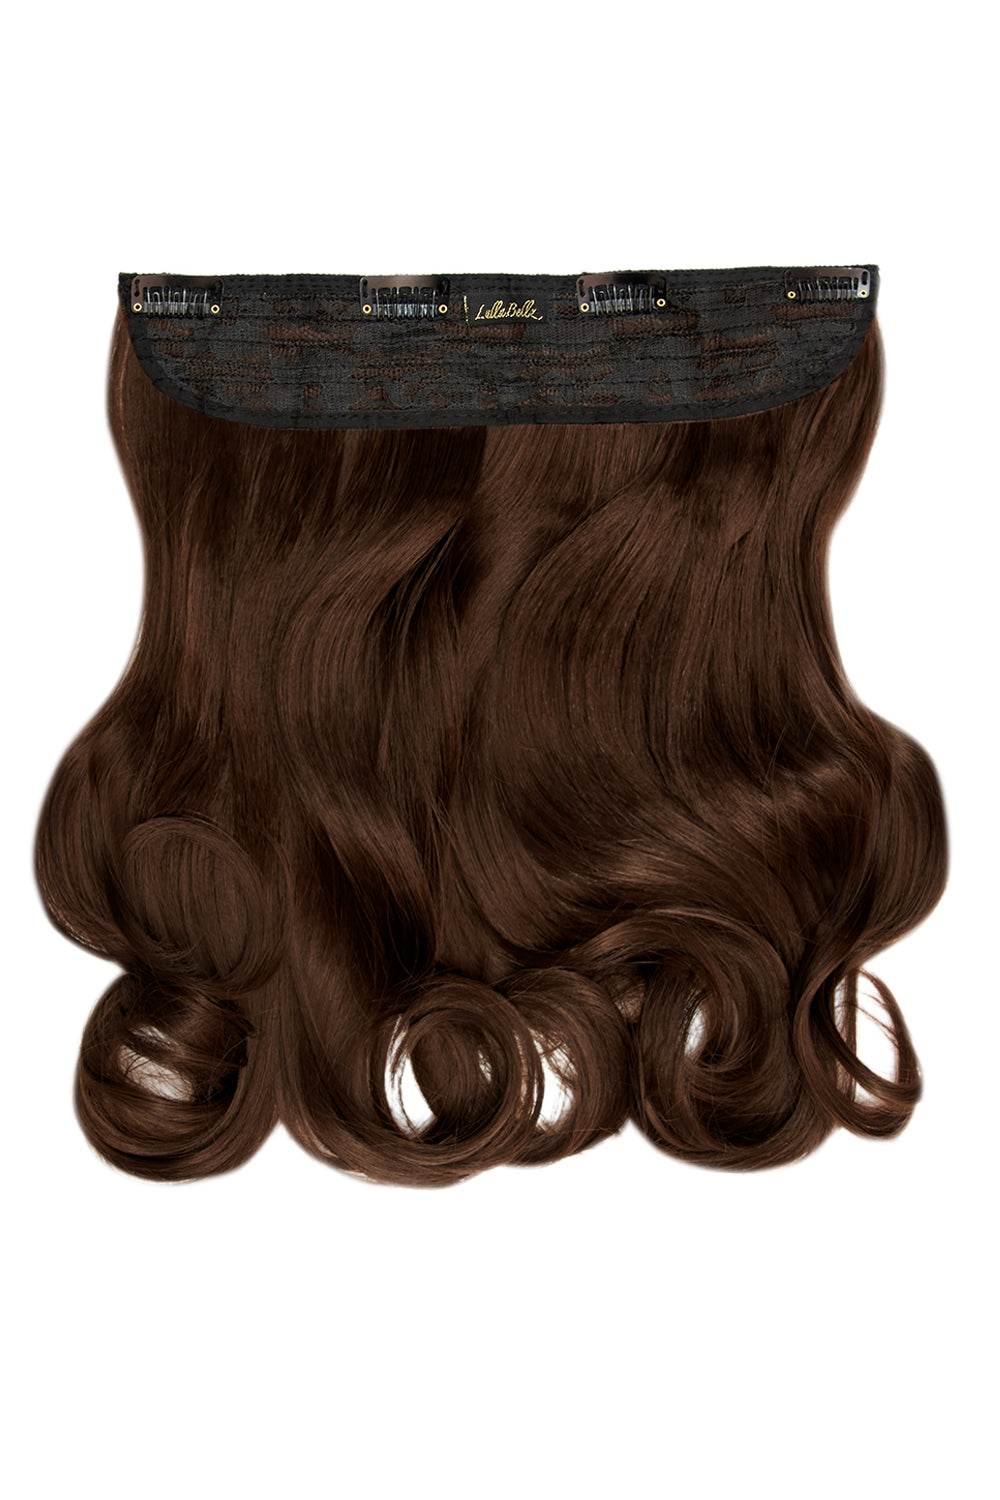 Thick 16" 1 Piece Curly Clip In Hair Extensions - LullaBellz - Golden Brown